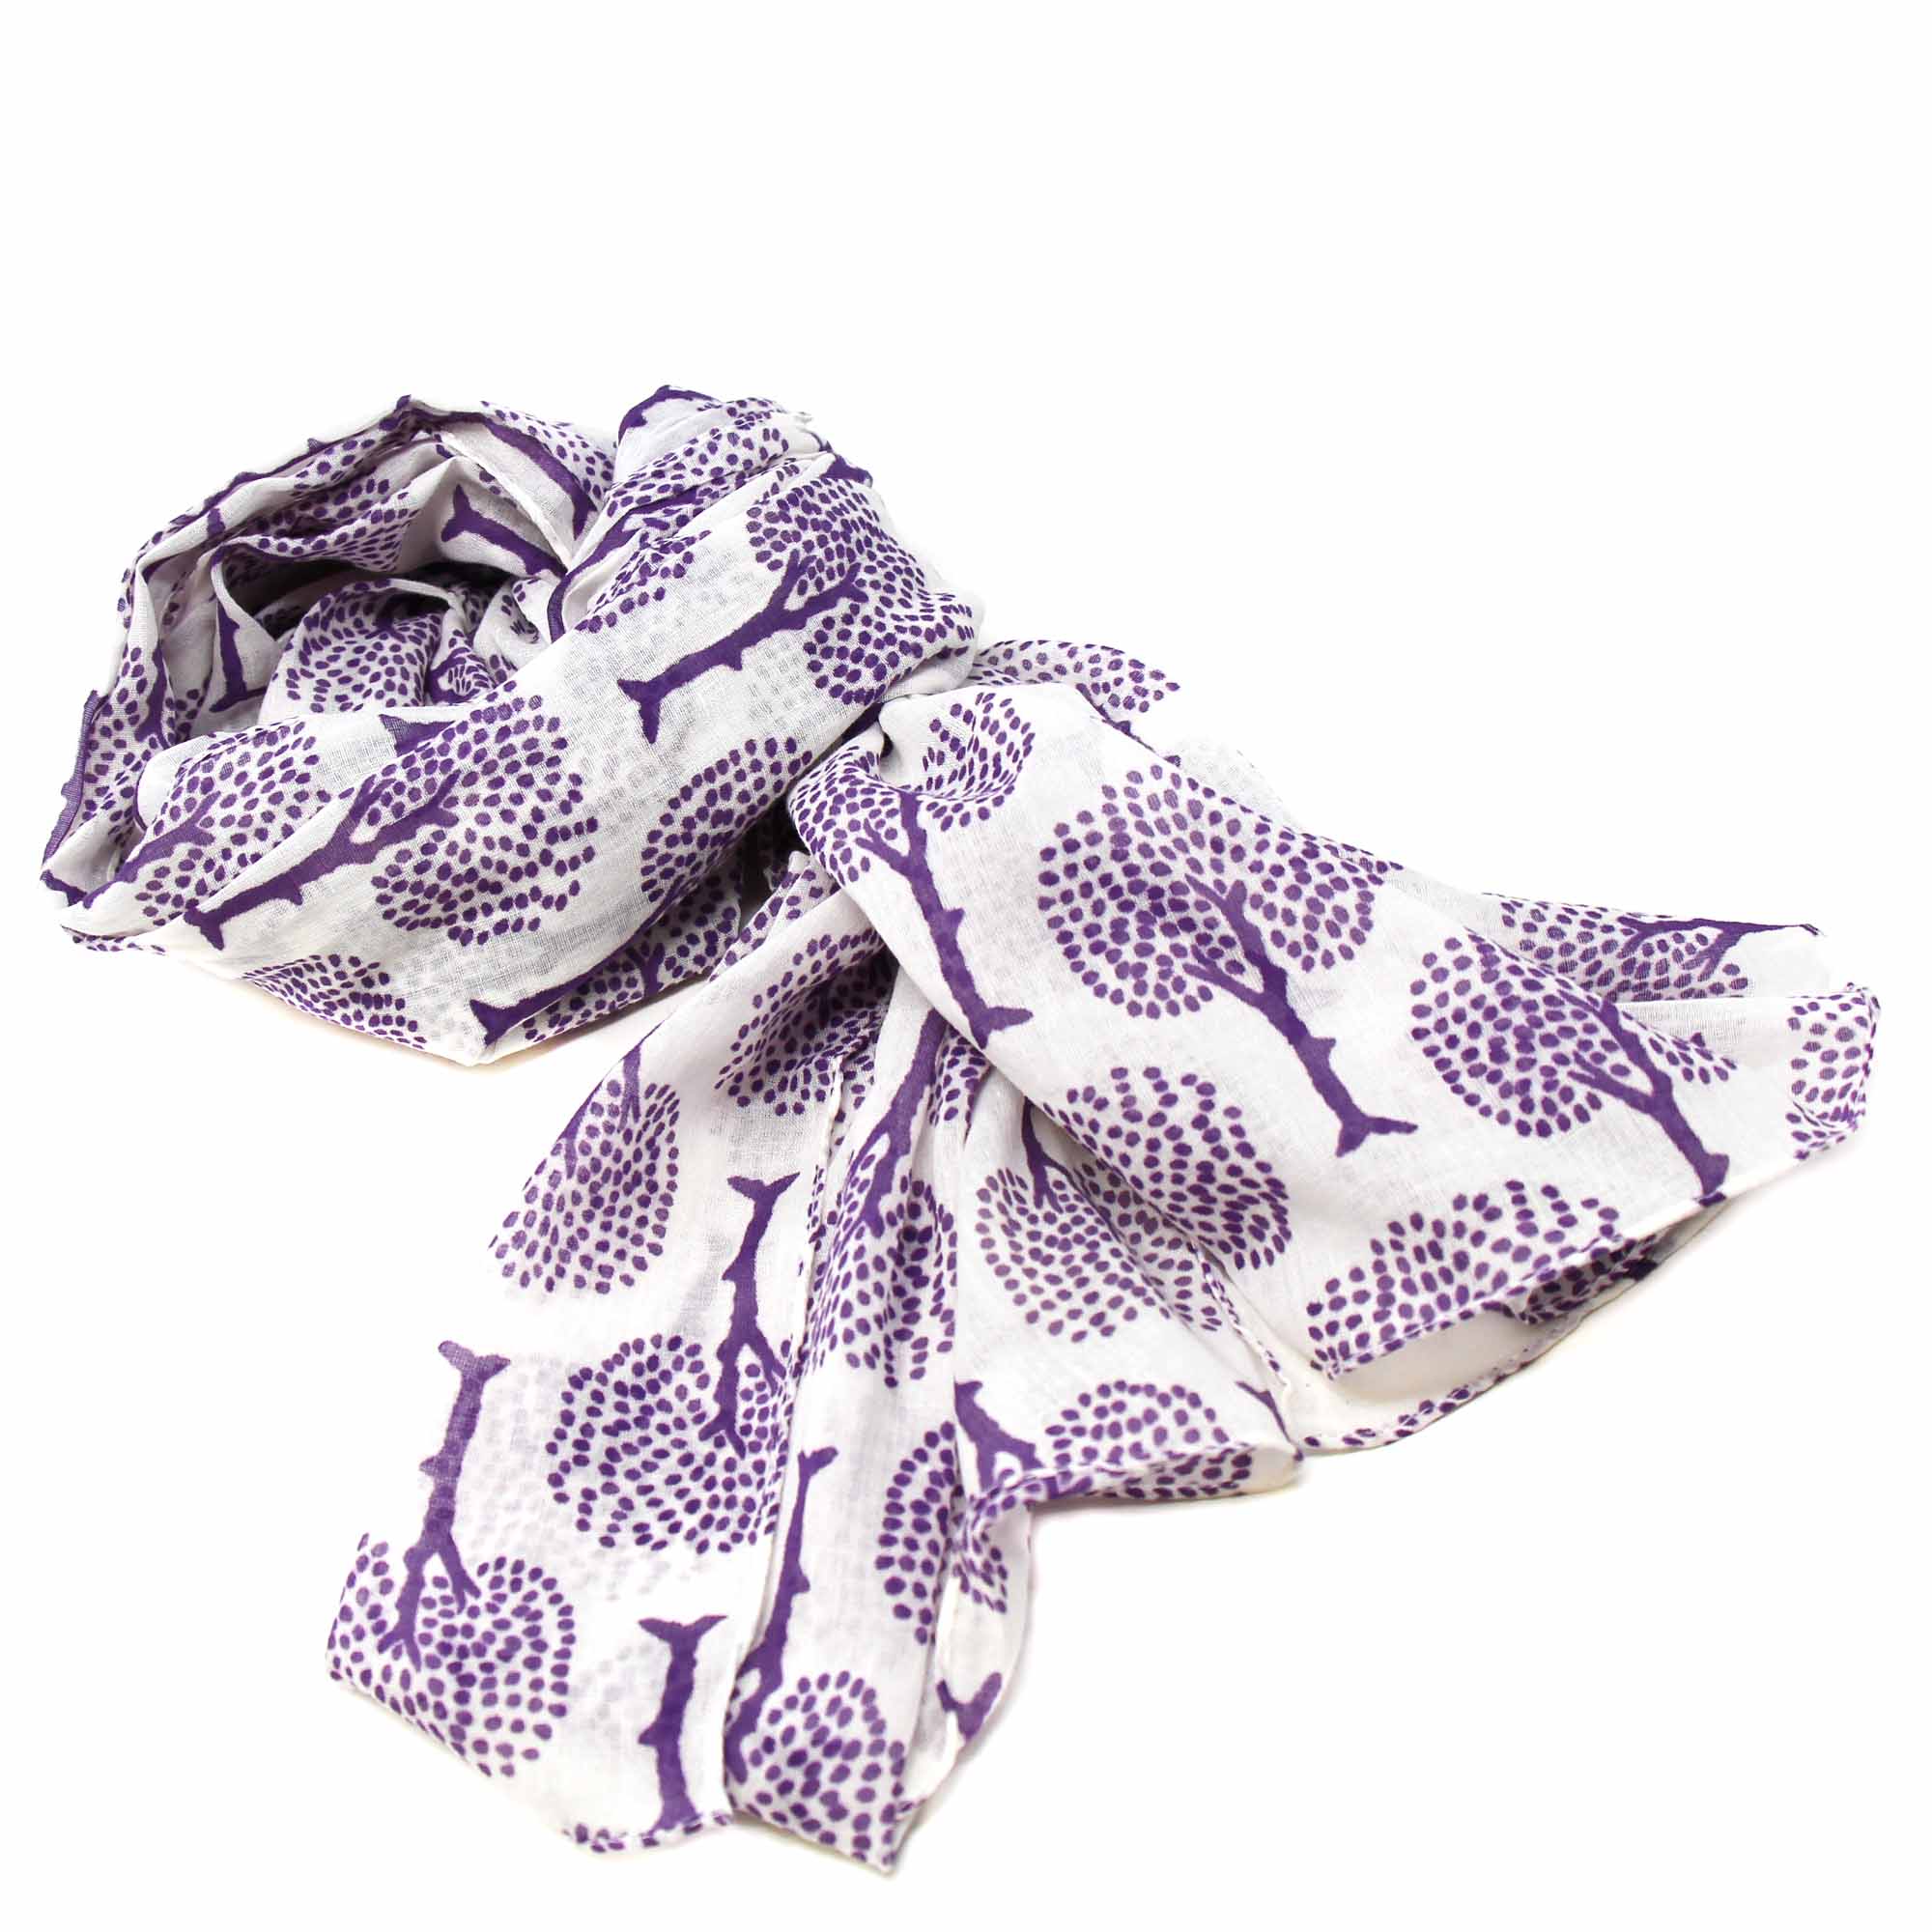 Hand-printed Cotton Scarf, Tree of Life Design